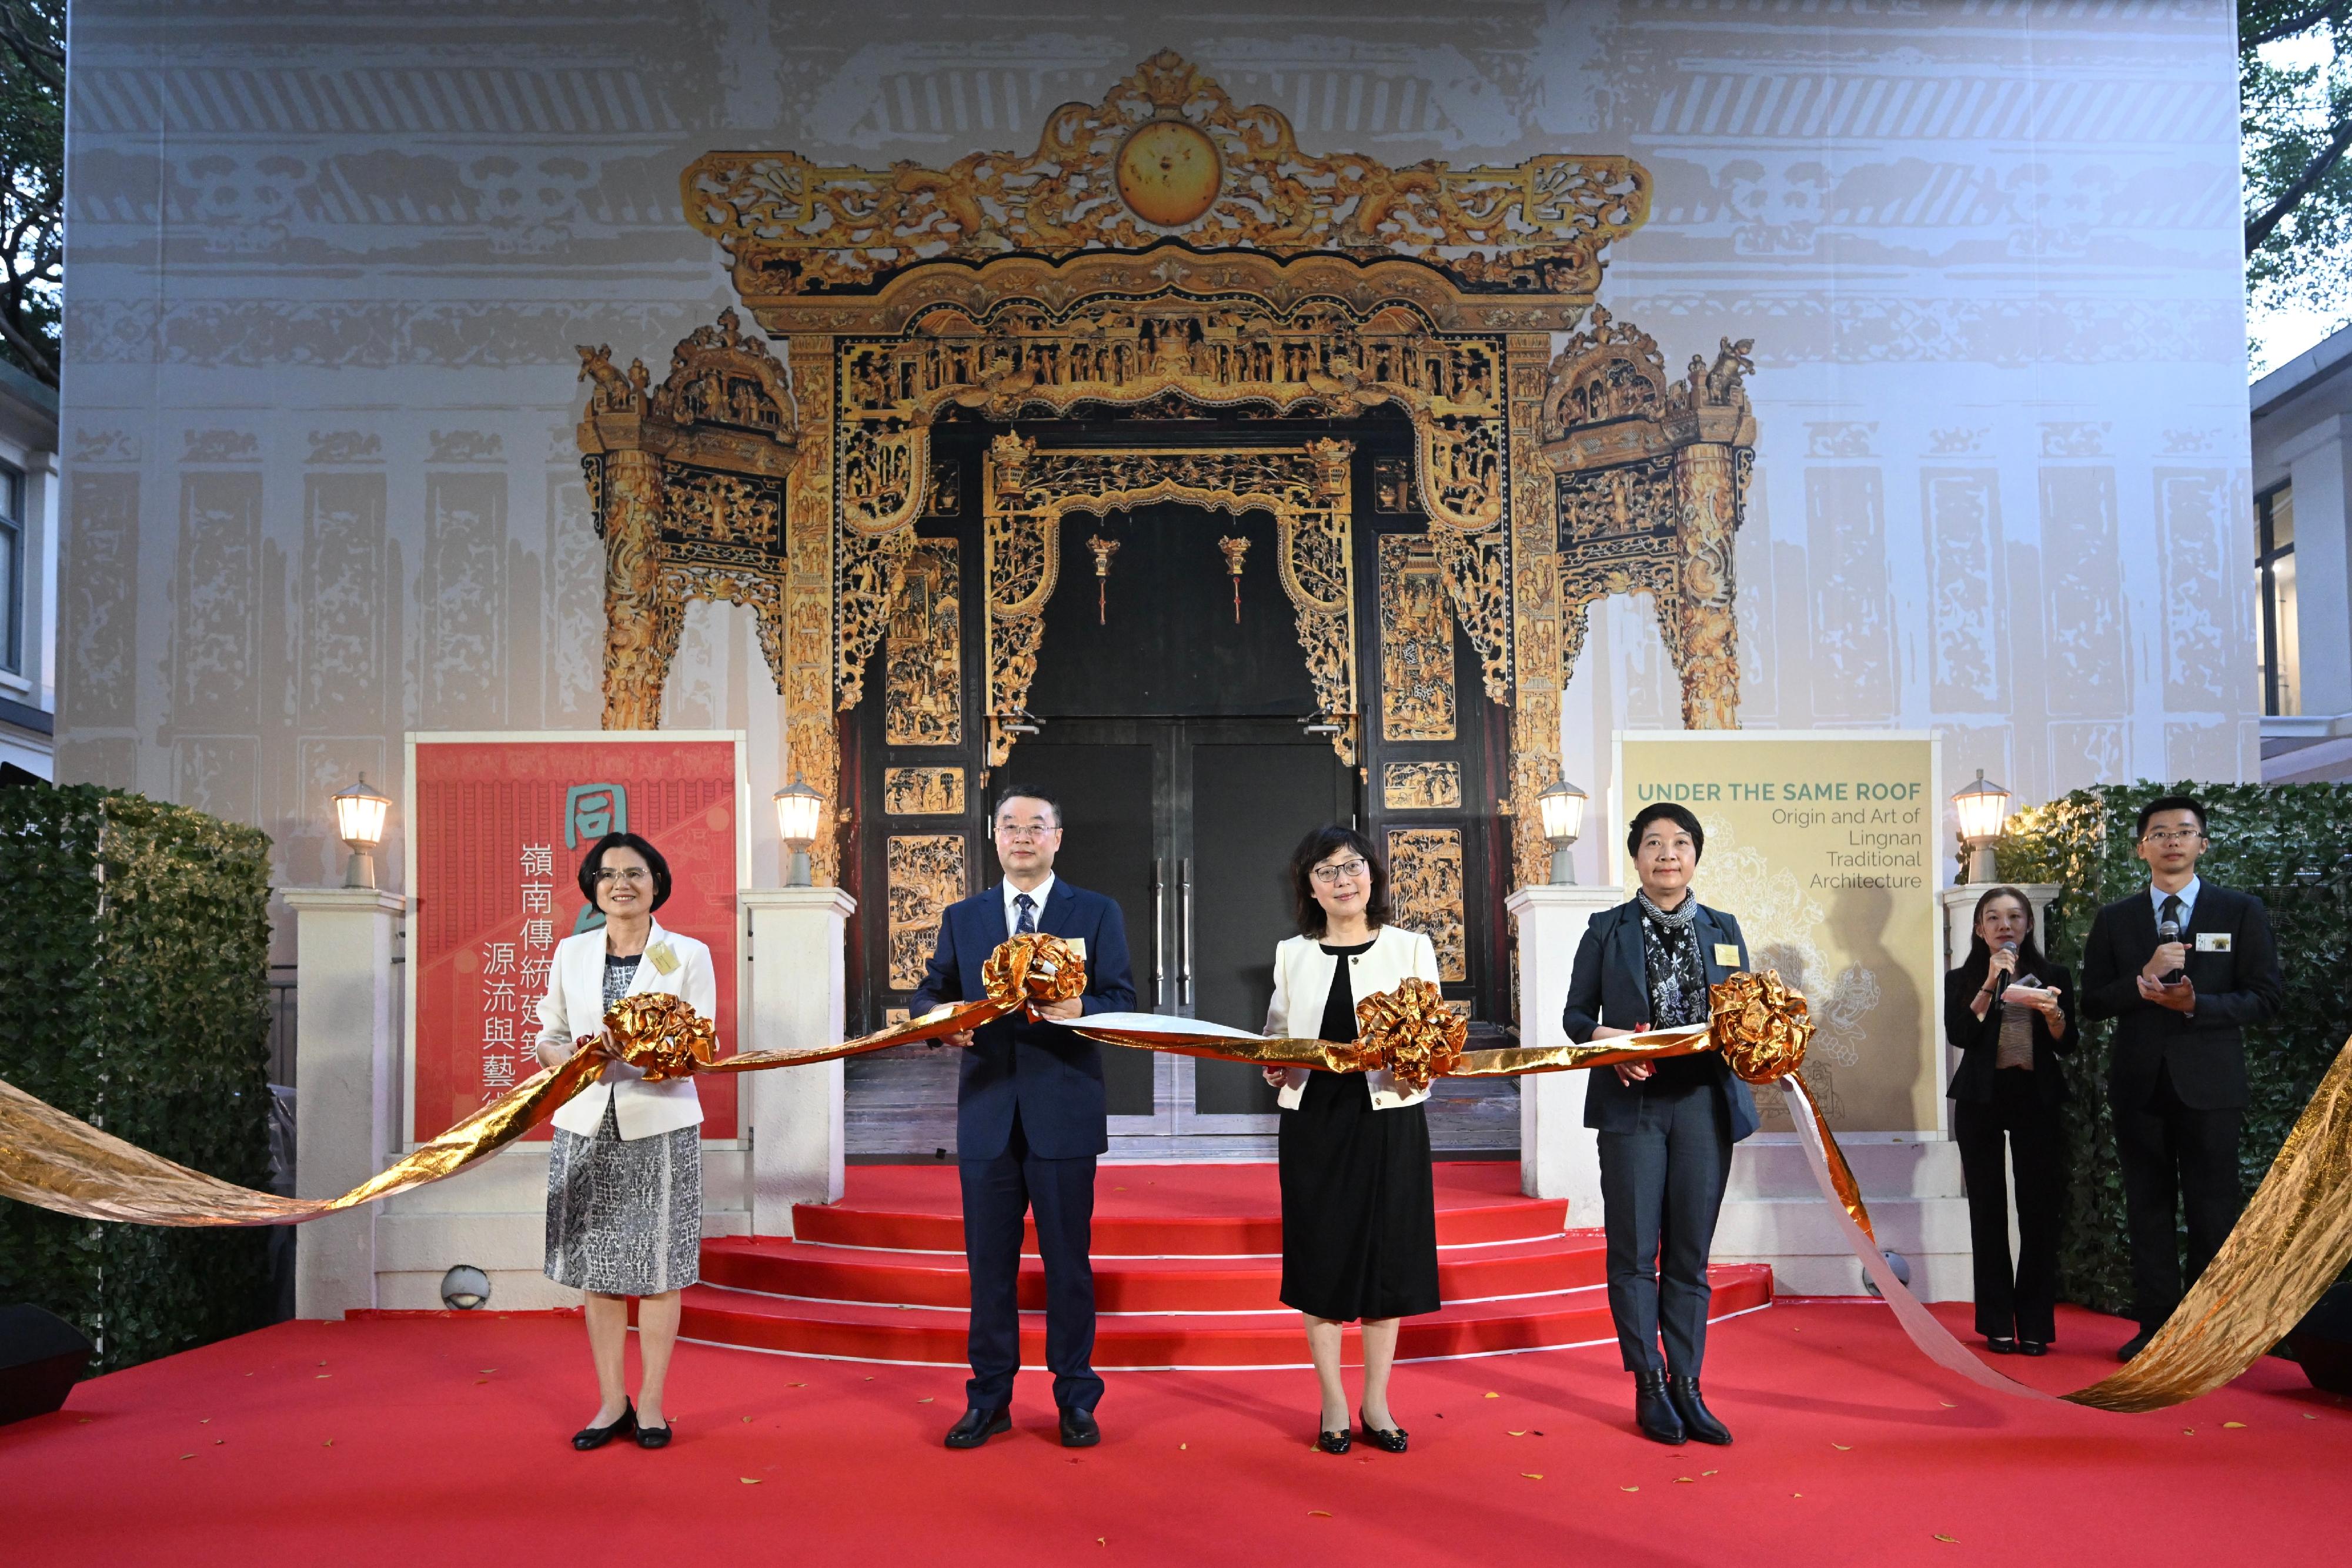 The "Under the Same Roof: Origin and Art of Lingnan Traditional Architecture" exhibition officially opened today (December 12). Photo shows the Secretary for Development, Ms Bernadette Linn (second right); the Director of Art Exhibitions China, Mr Tan Ping (second left); the President of the Cultural Affairs Bureau of the Government of the Macao Special Administrative Region, Ms Leong Wai-man (first right); and the Deputy Director General of the Guangzhou Municipal Culture, Radio, Television and Tourism Bureau, Ms Ou Caiqun (first left), officiating at the opening ceremony.